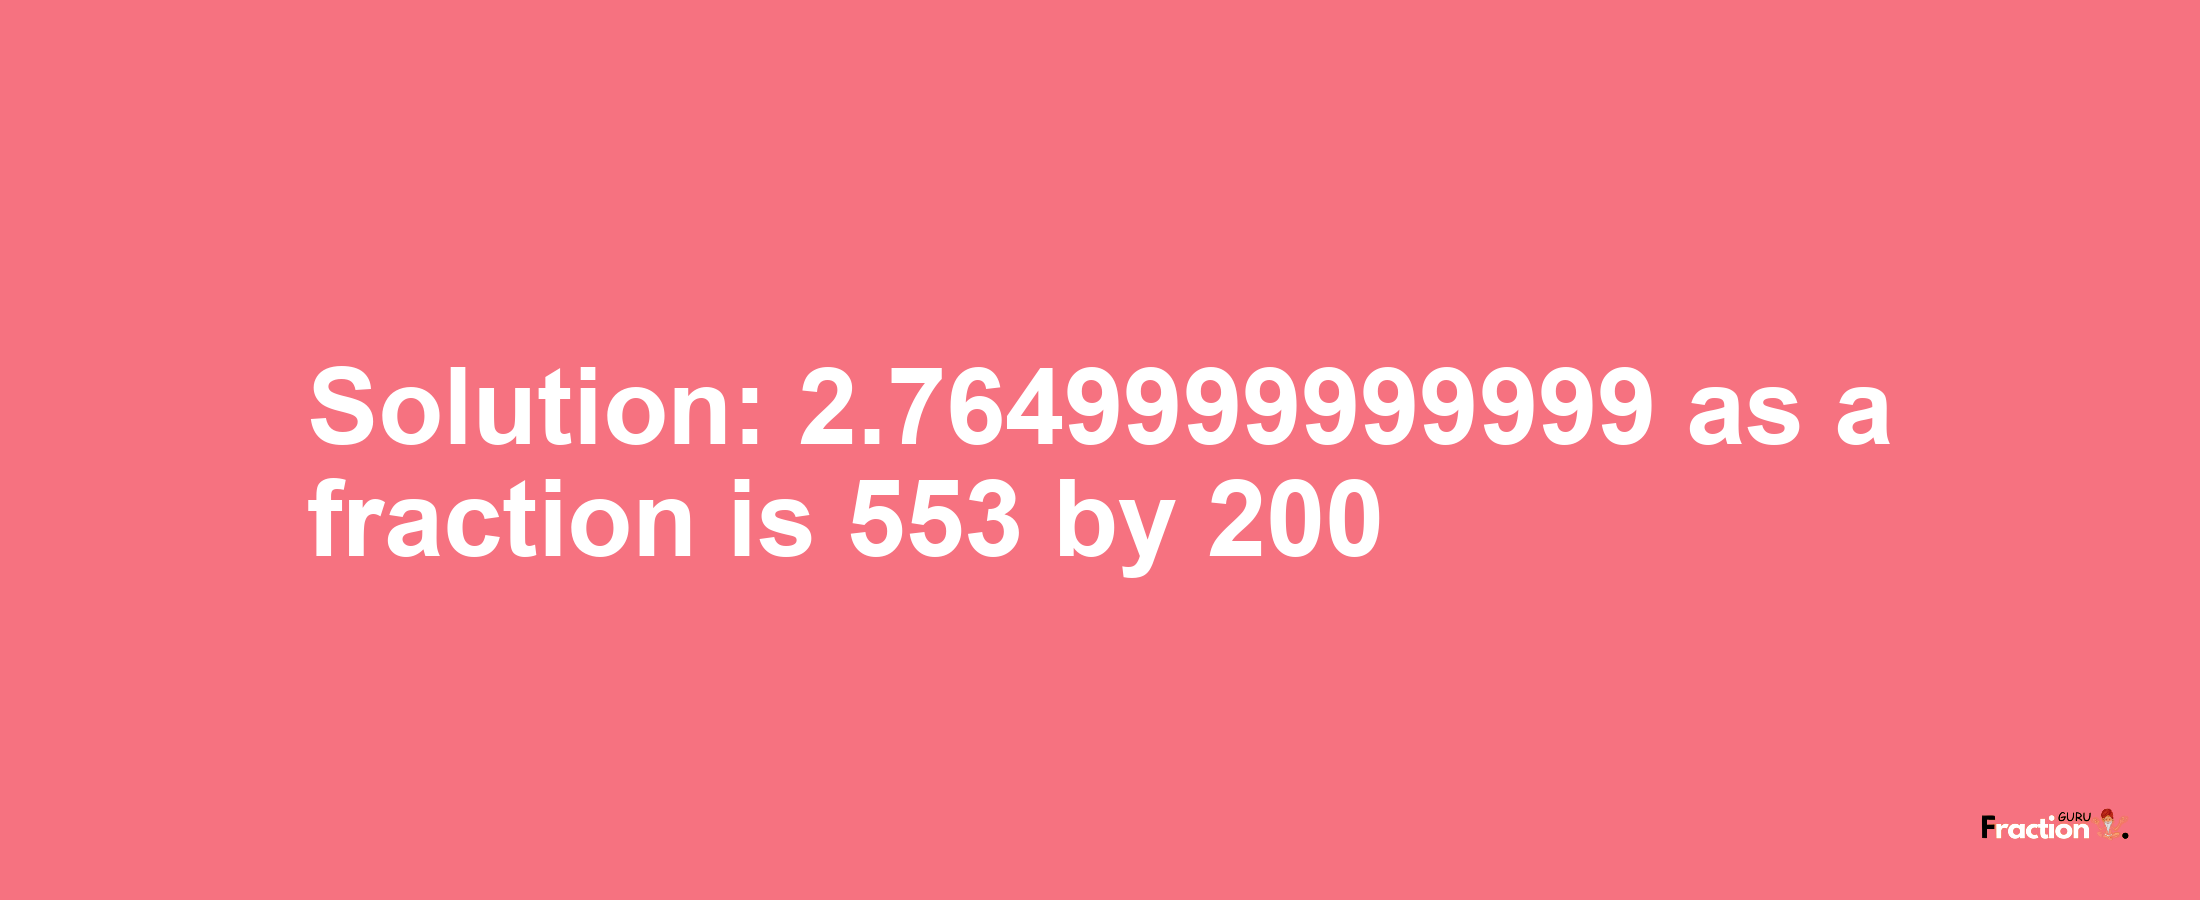 Solution:2.7649999999999 as a fraction is 553/200